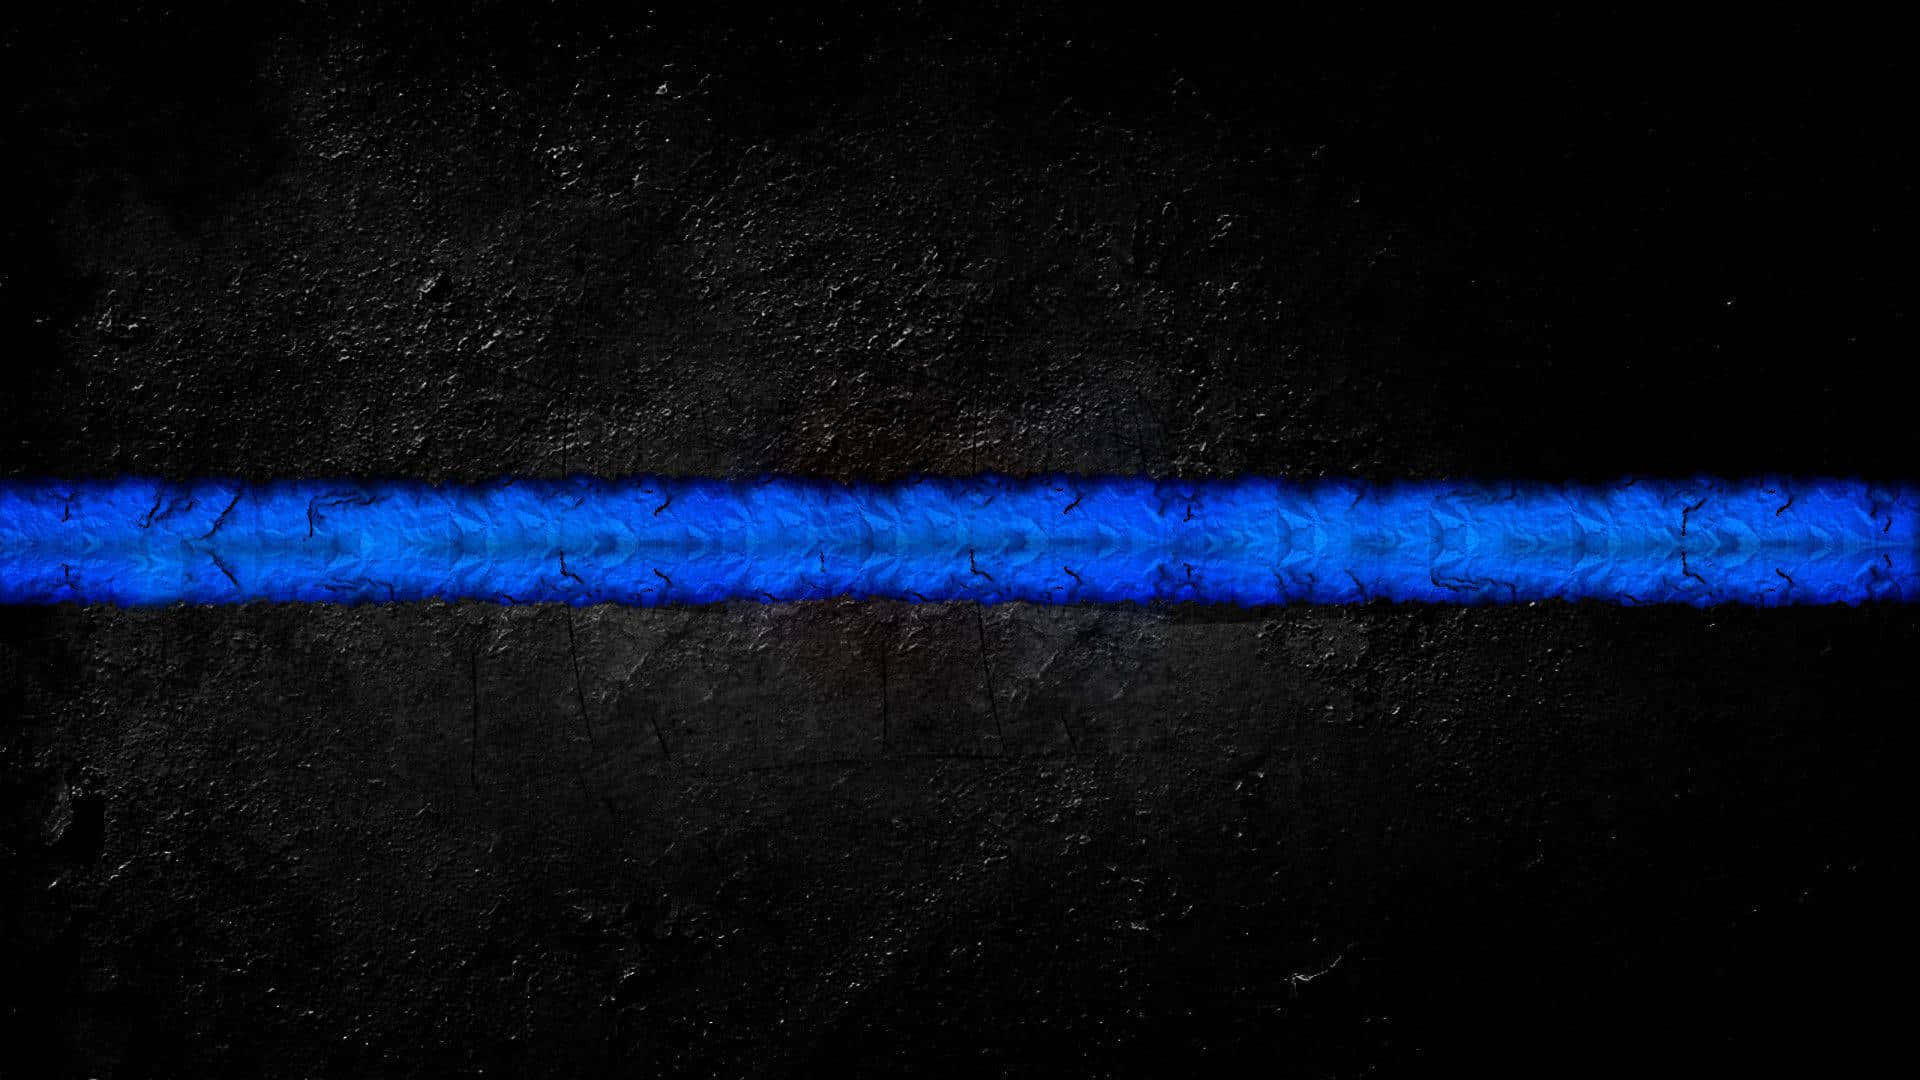 Honoring the Thin Blue Line - Law Enforcement Courage and Solidarity